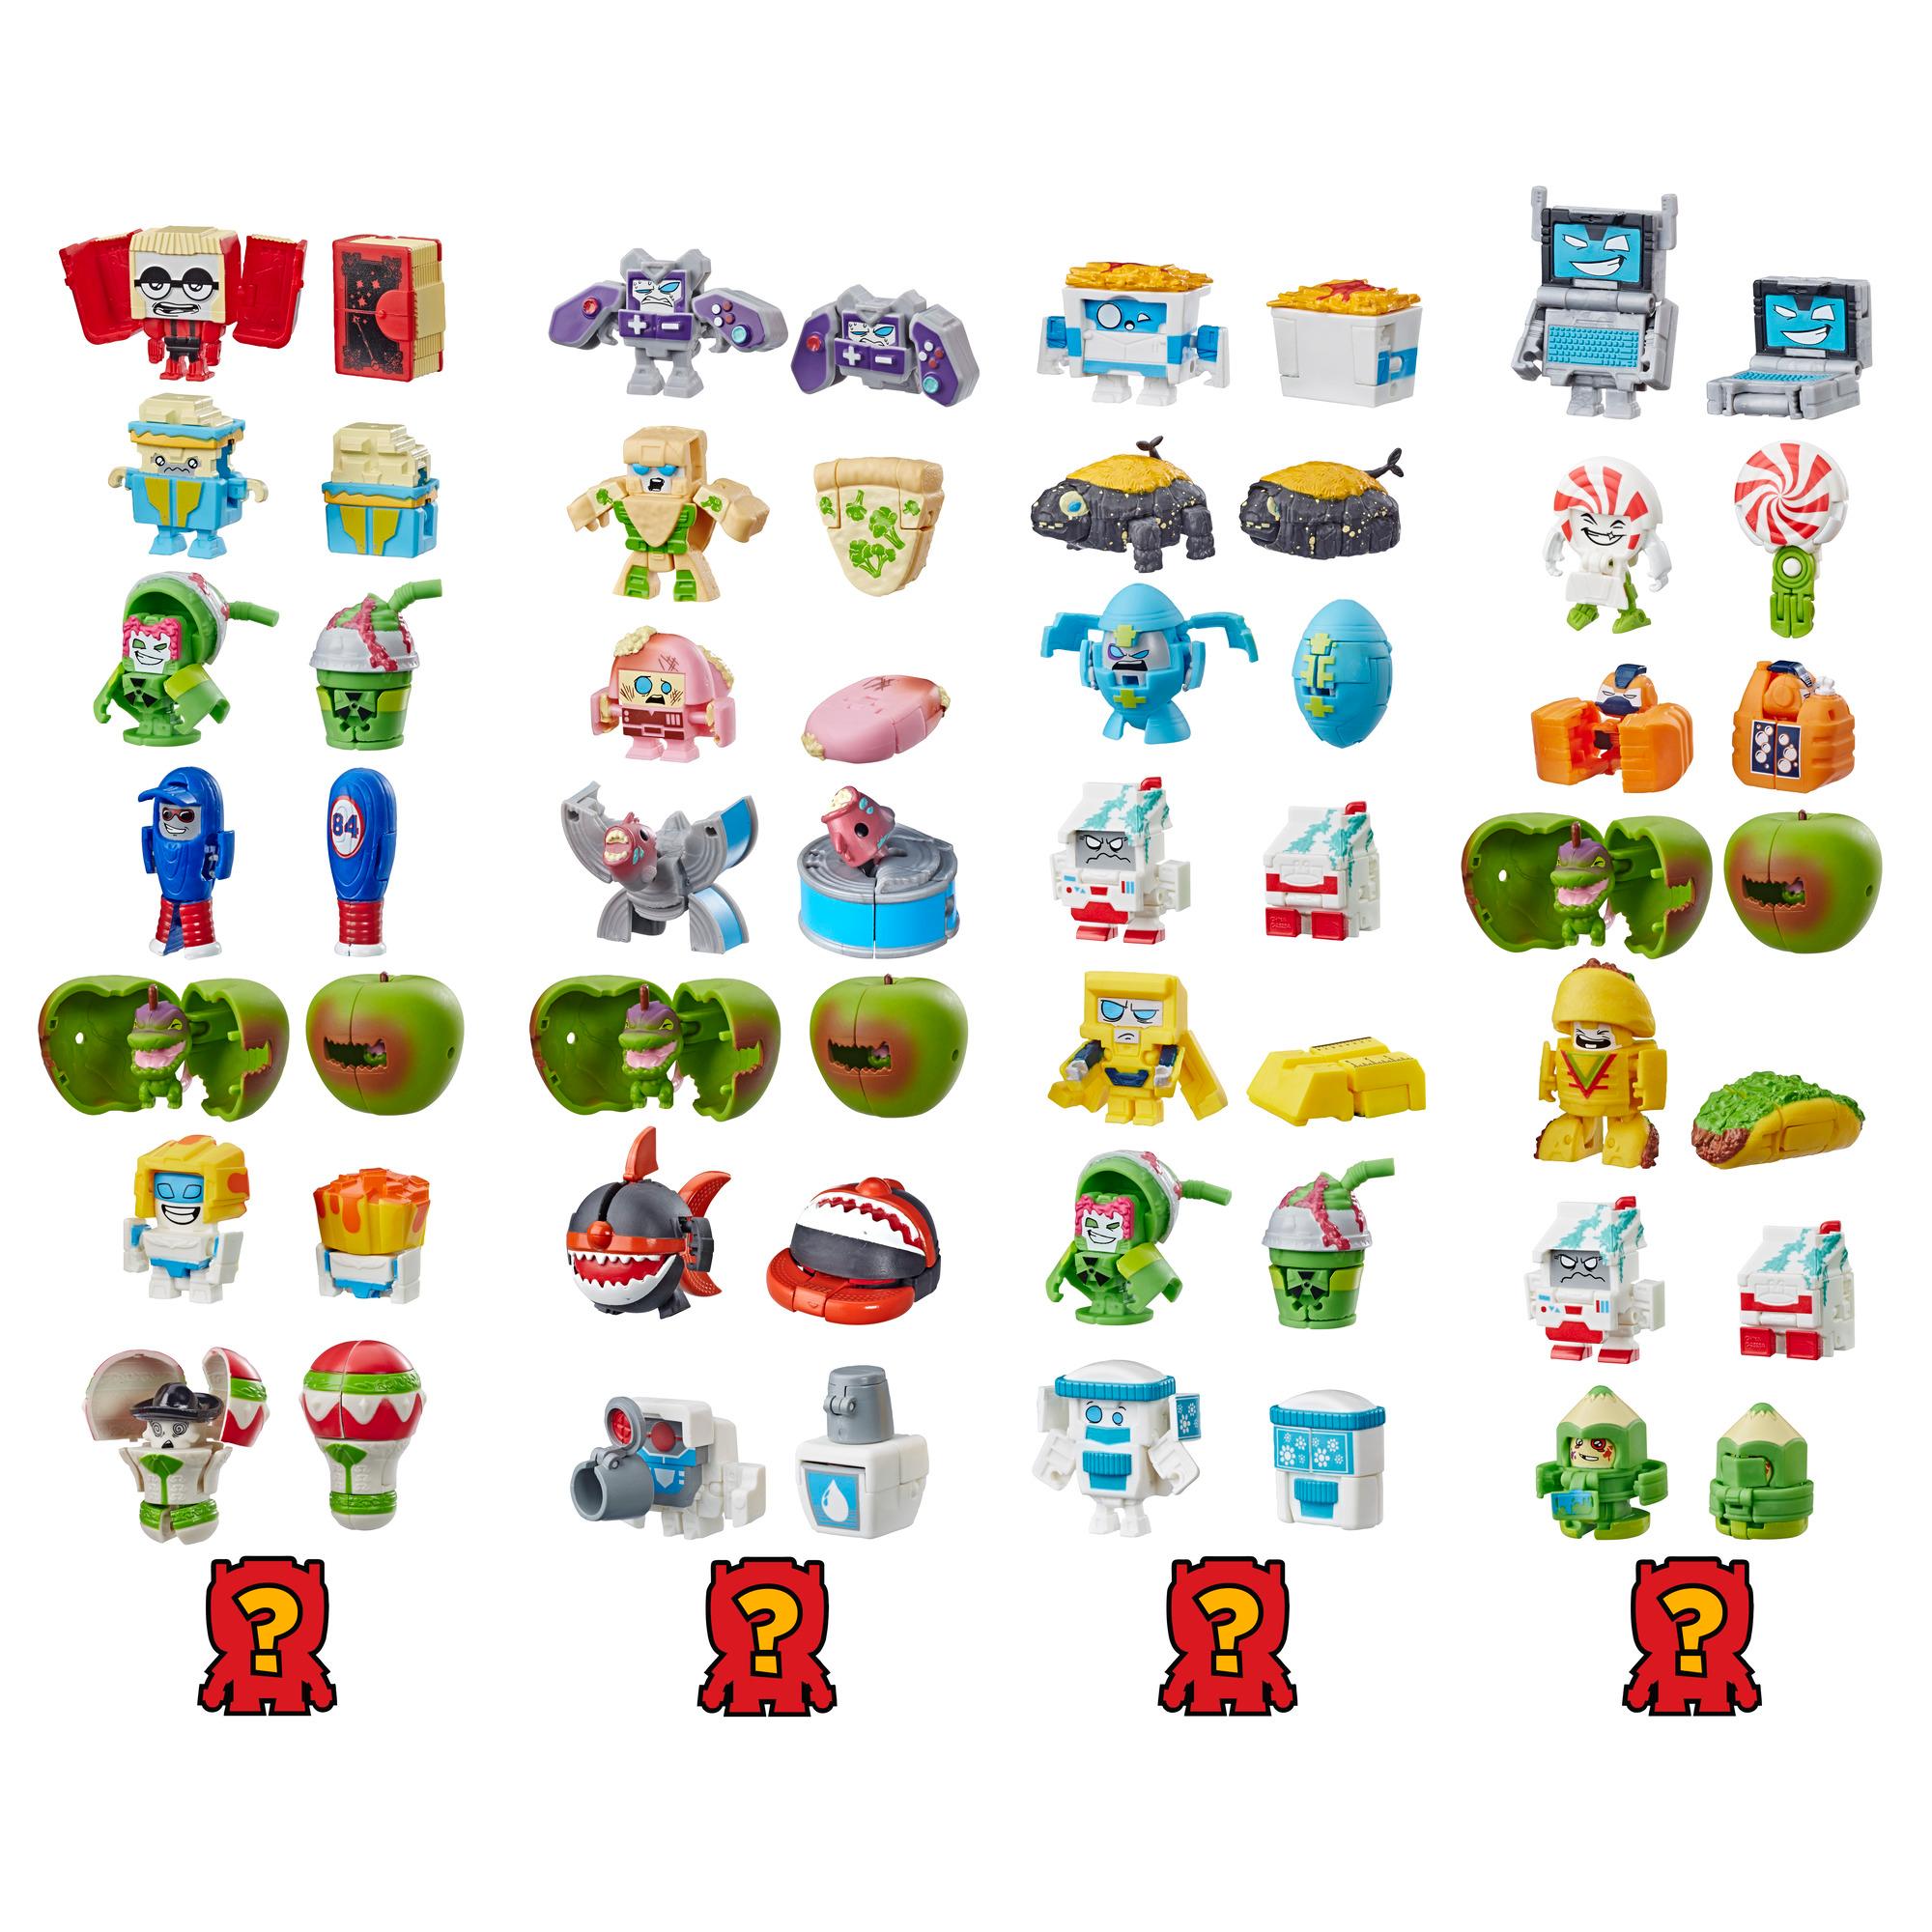 Transformers Toys BotBots Series 2 Spoiled Rottens 8-Pack – Mystery 2-In-1 Collectible Figures! Kids Ages 5 and Up (Styles and Colors May Vary) by Hasbro